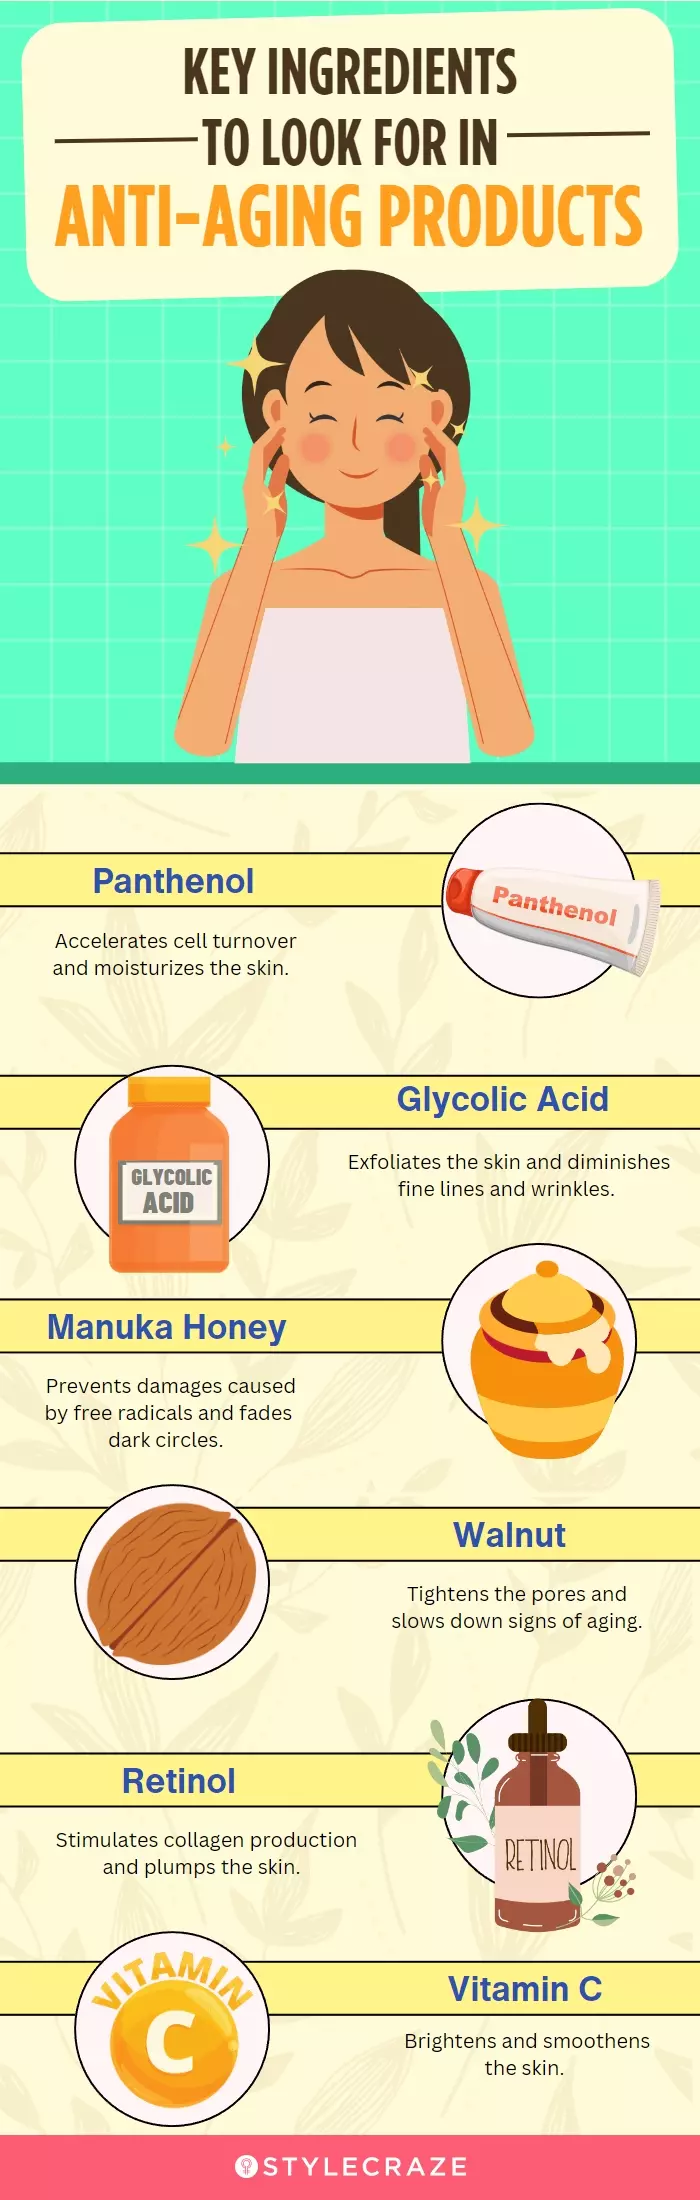 Key Ingredients To Look For In Anti-Aging Products (infographic)